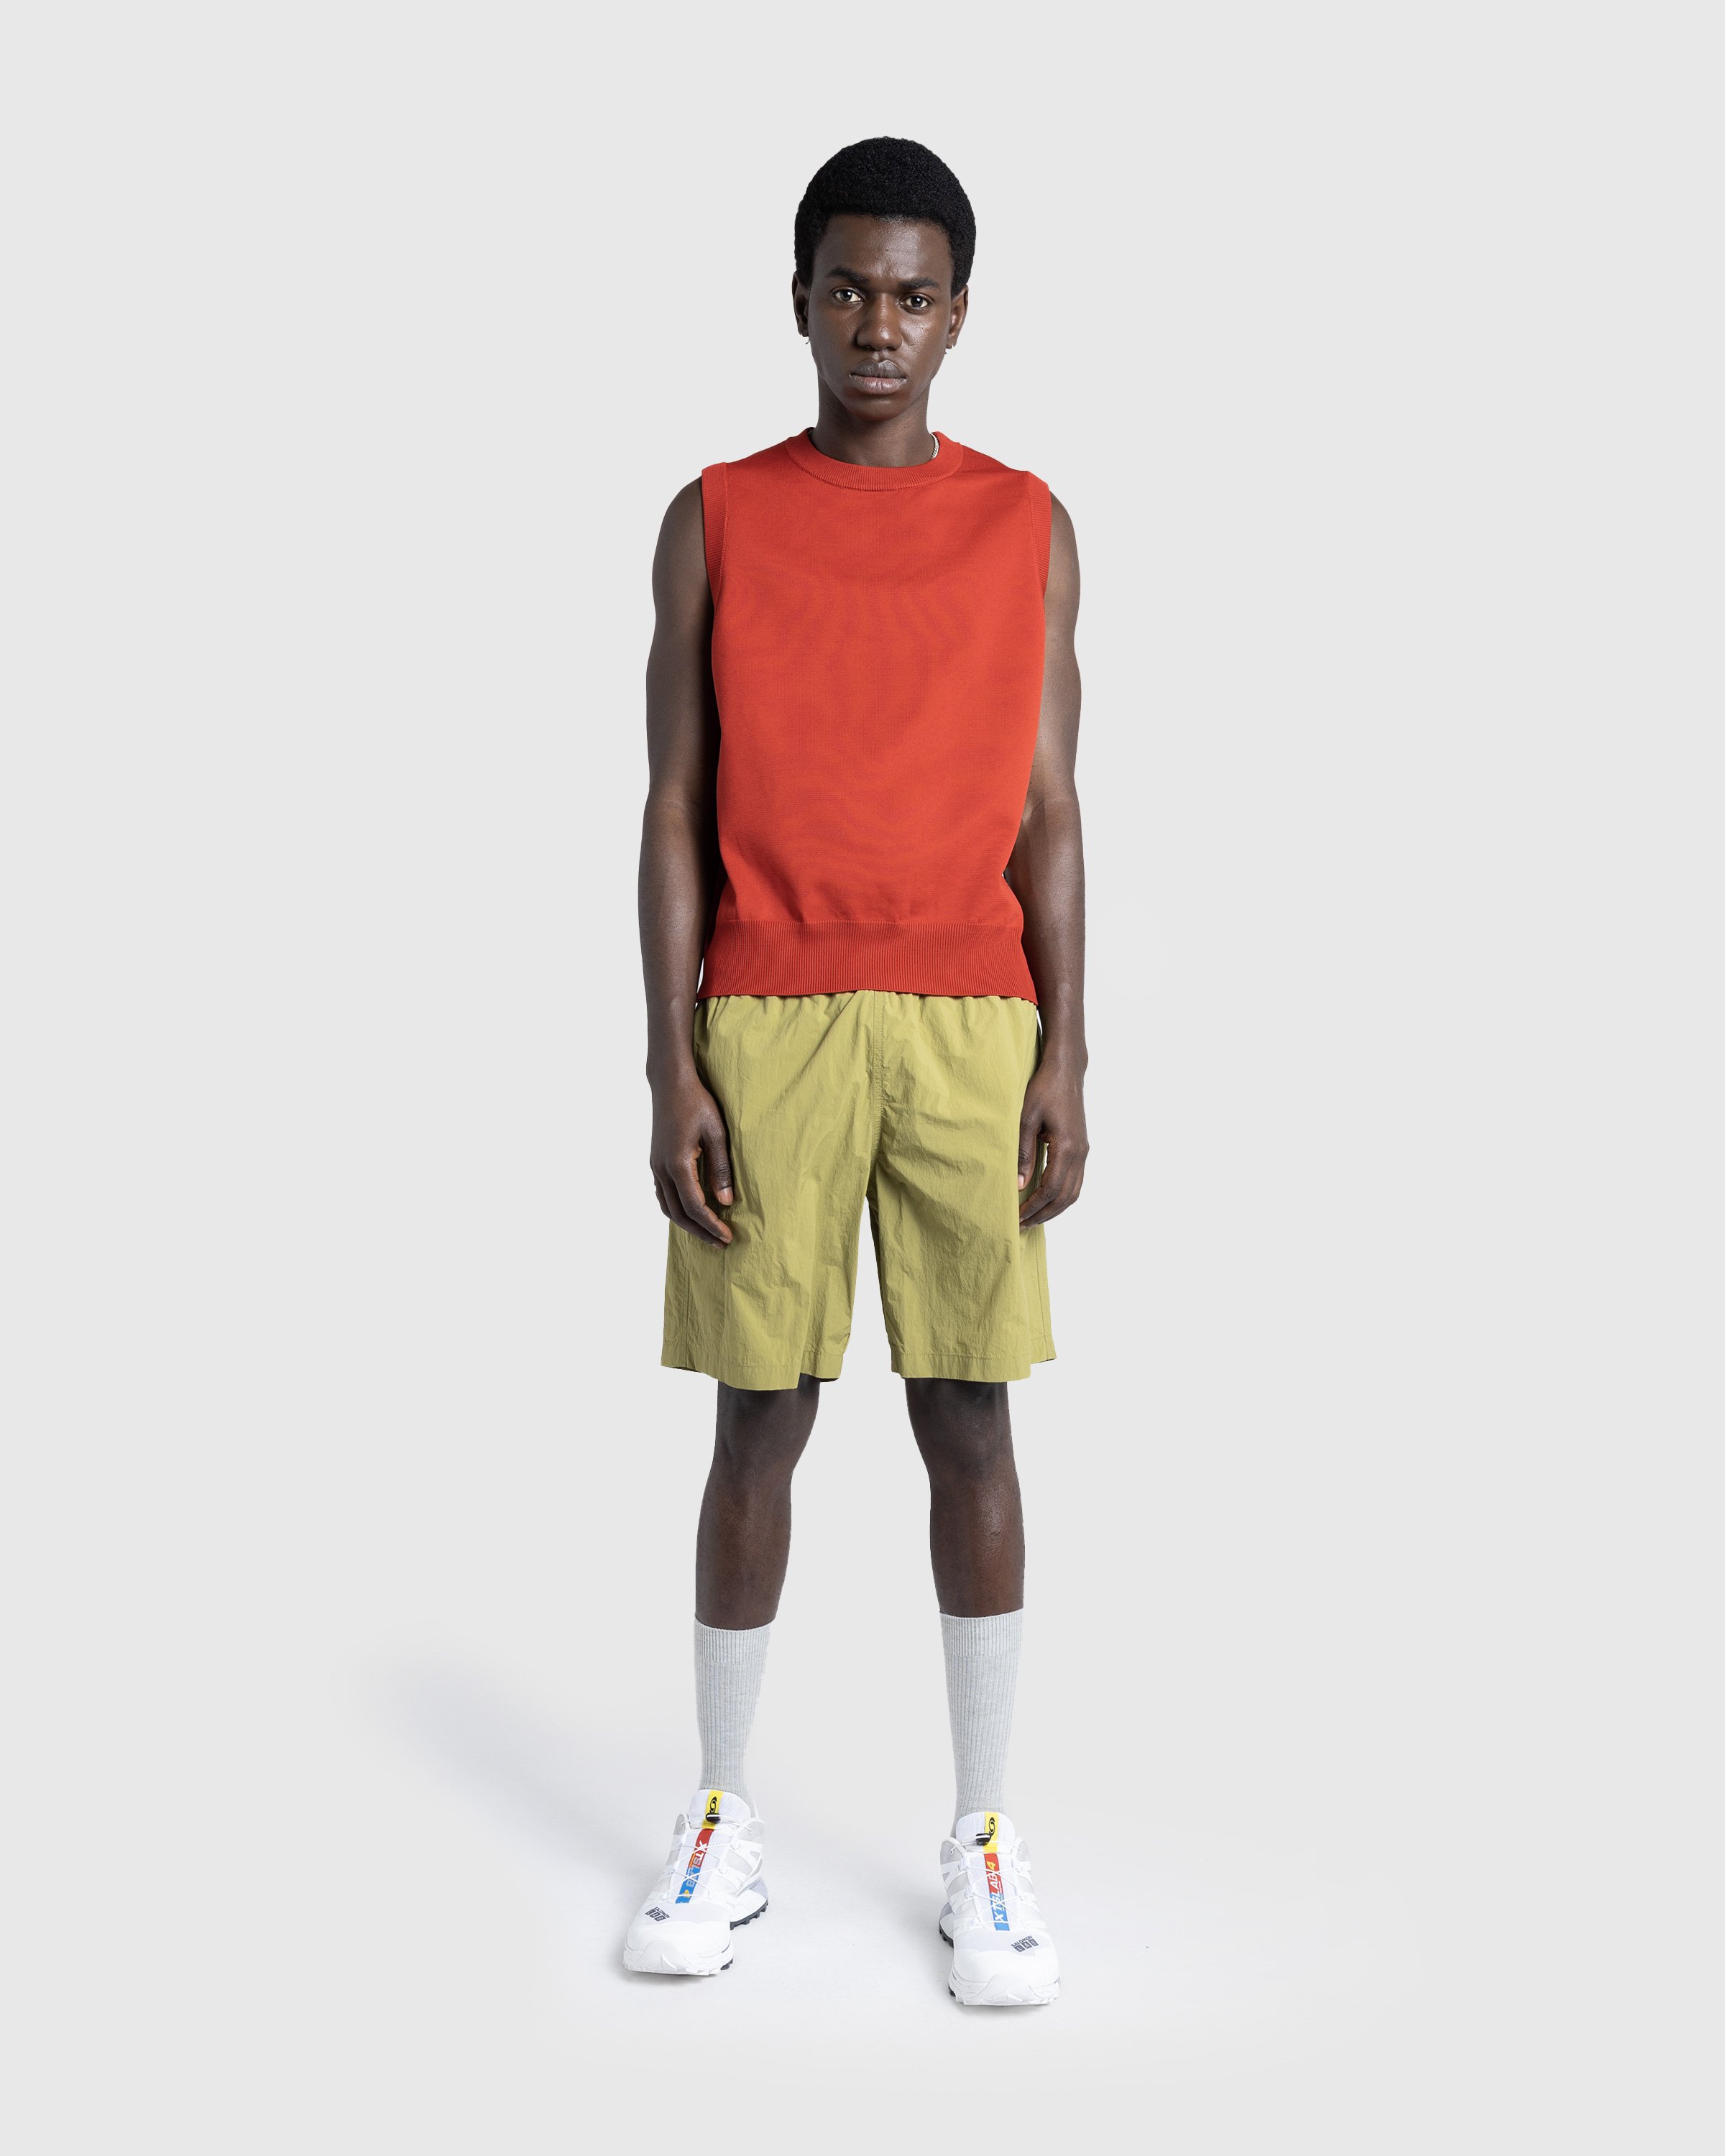 Highsnobiety HS05 - Poly Knit Tank Top Ruby Red - Clothing - Ruby Red - Image 4